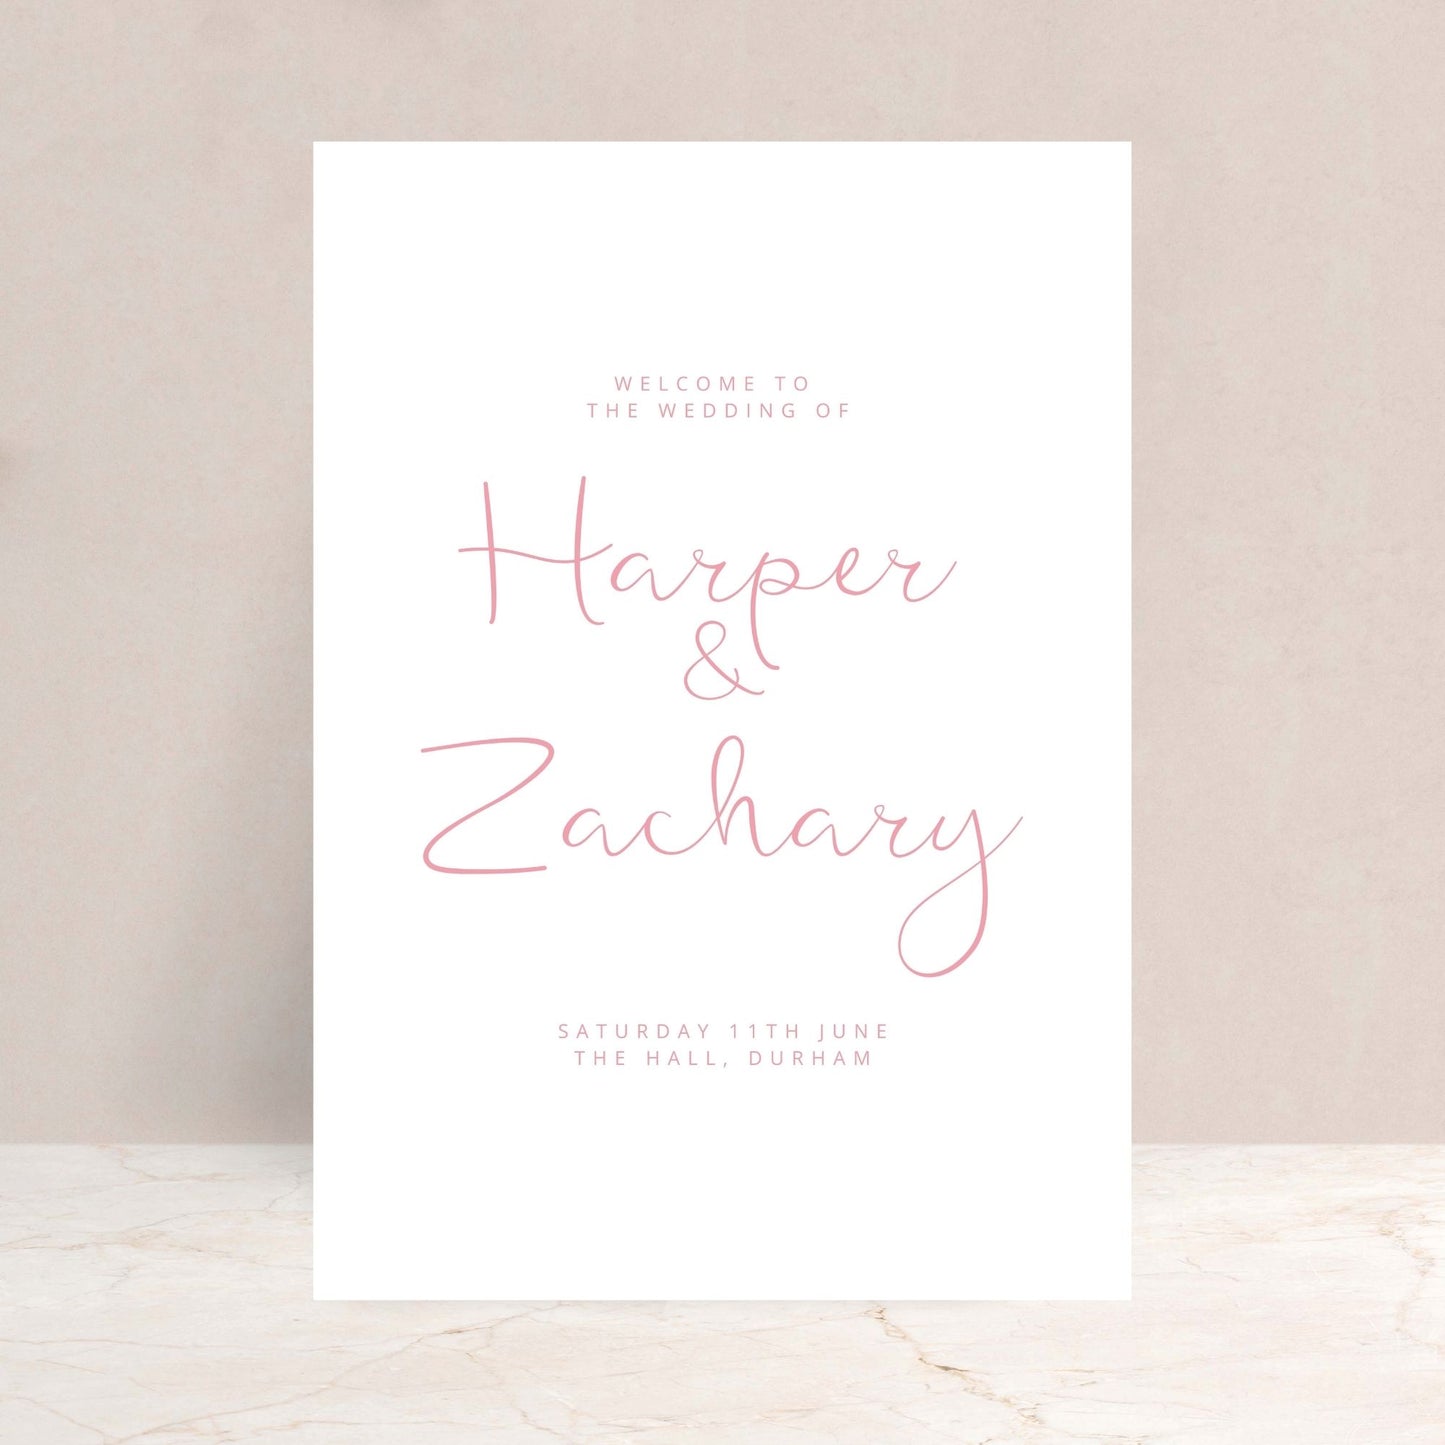 HARPER Wedding Welcome Sign - Wedding Ceremony Stationery available at The Ivy Collection | Luxury Wedding Stationery